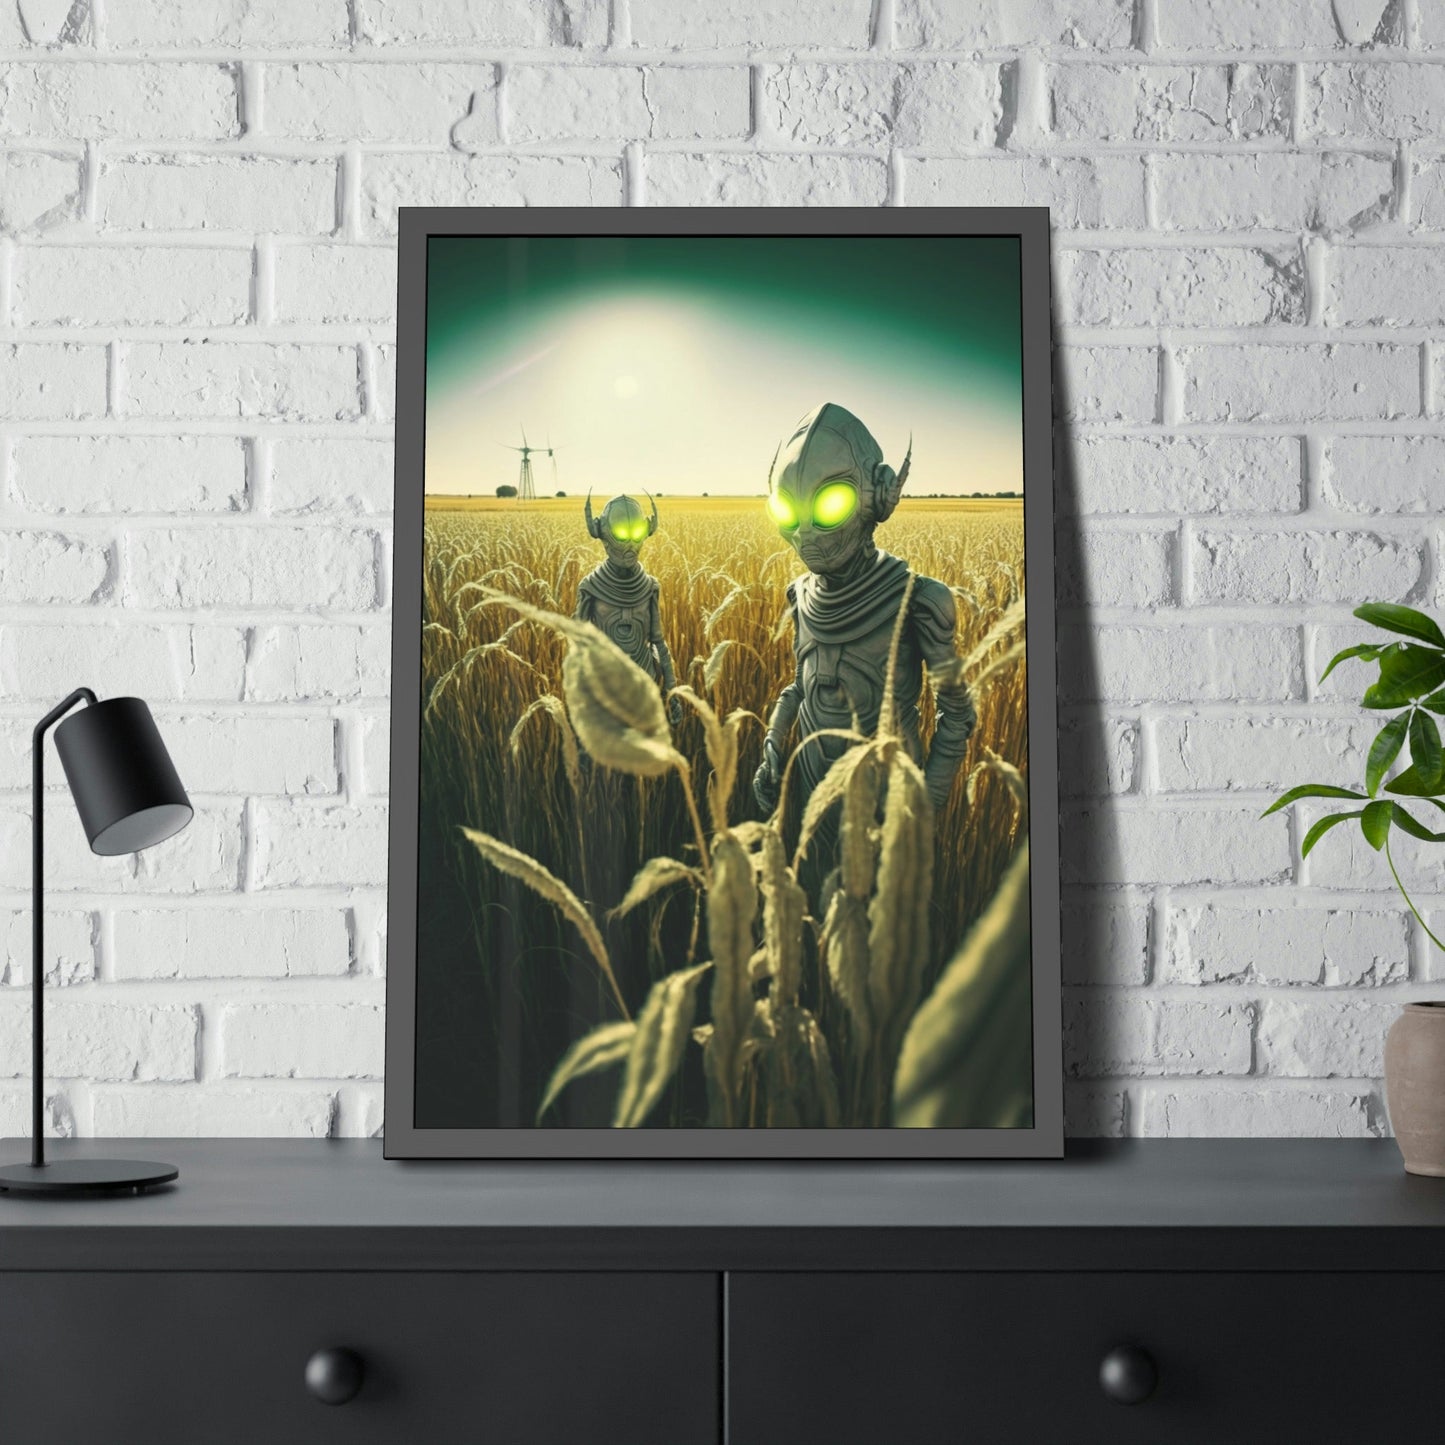 Artistic Aliens: A Canvas Print Featuring Mysterious Extraterrestrial Life Forms